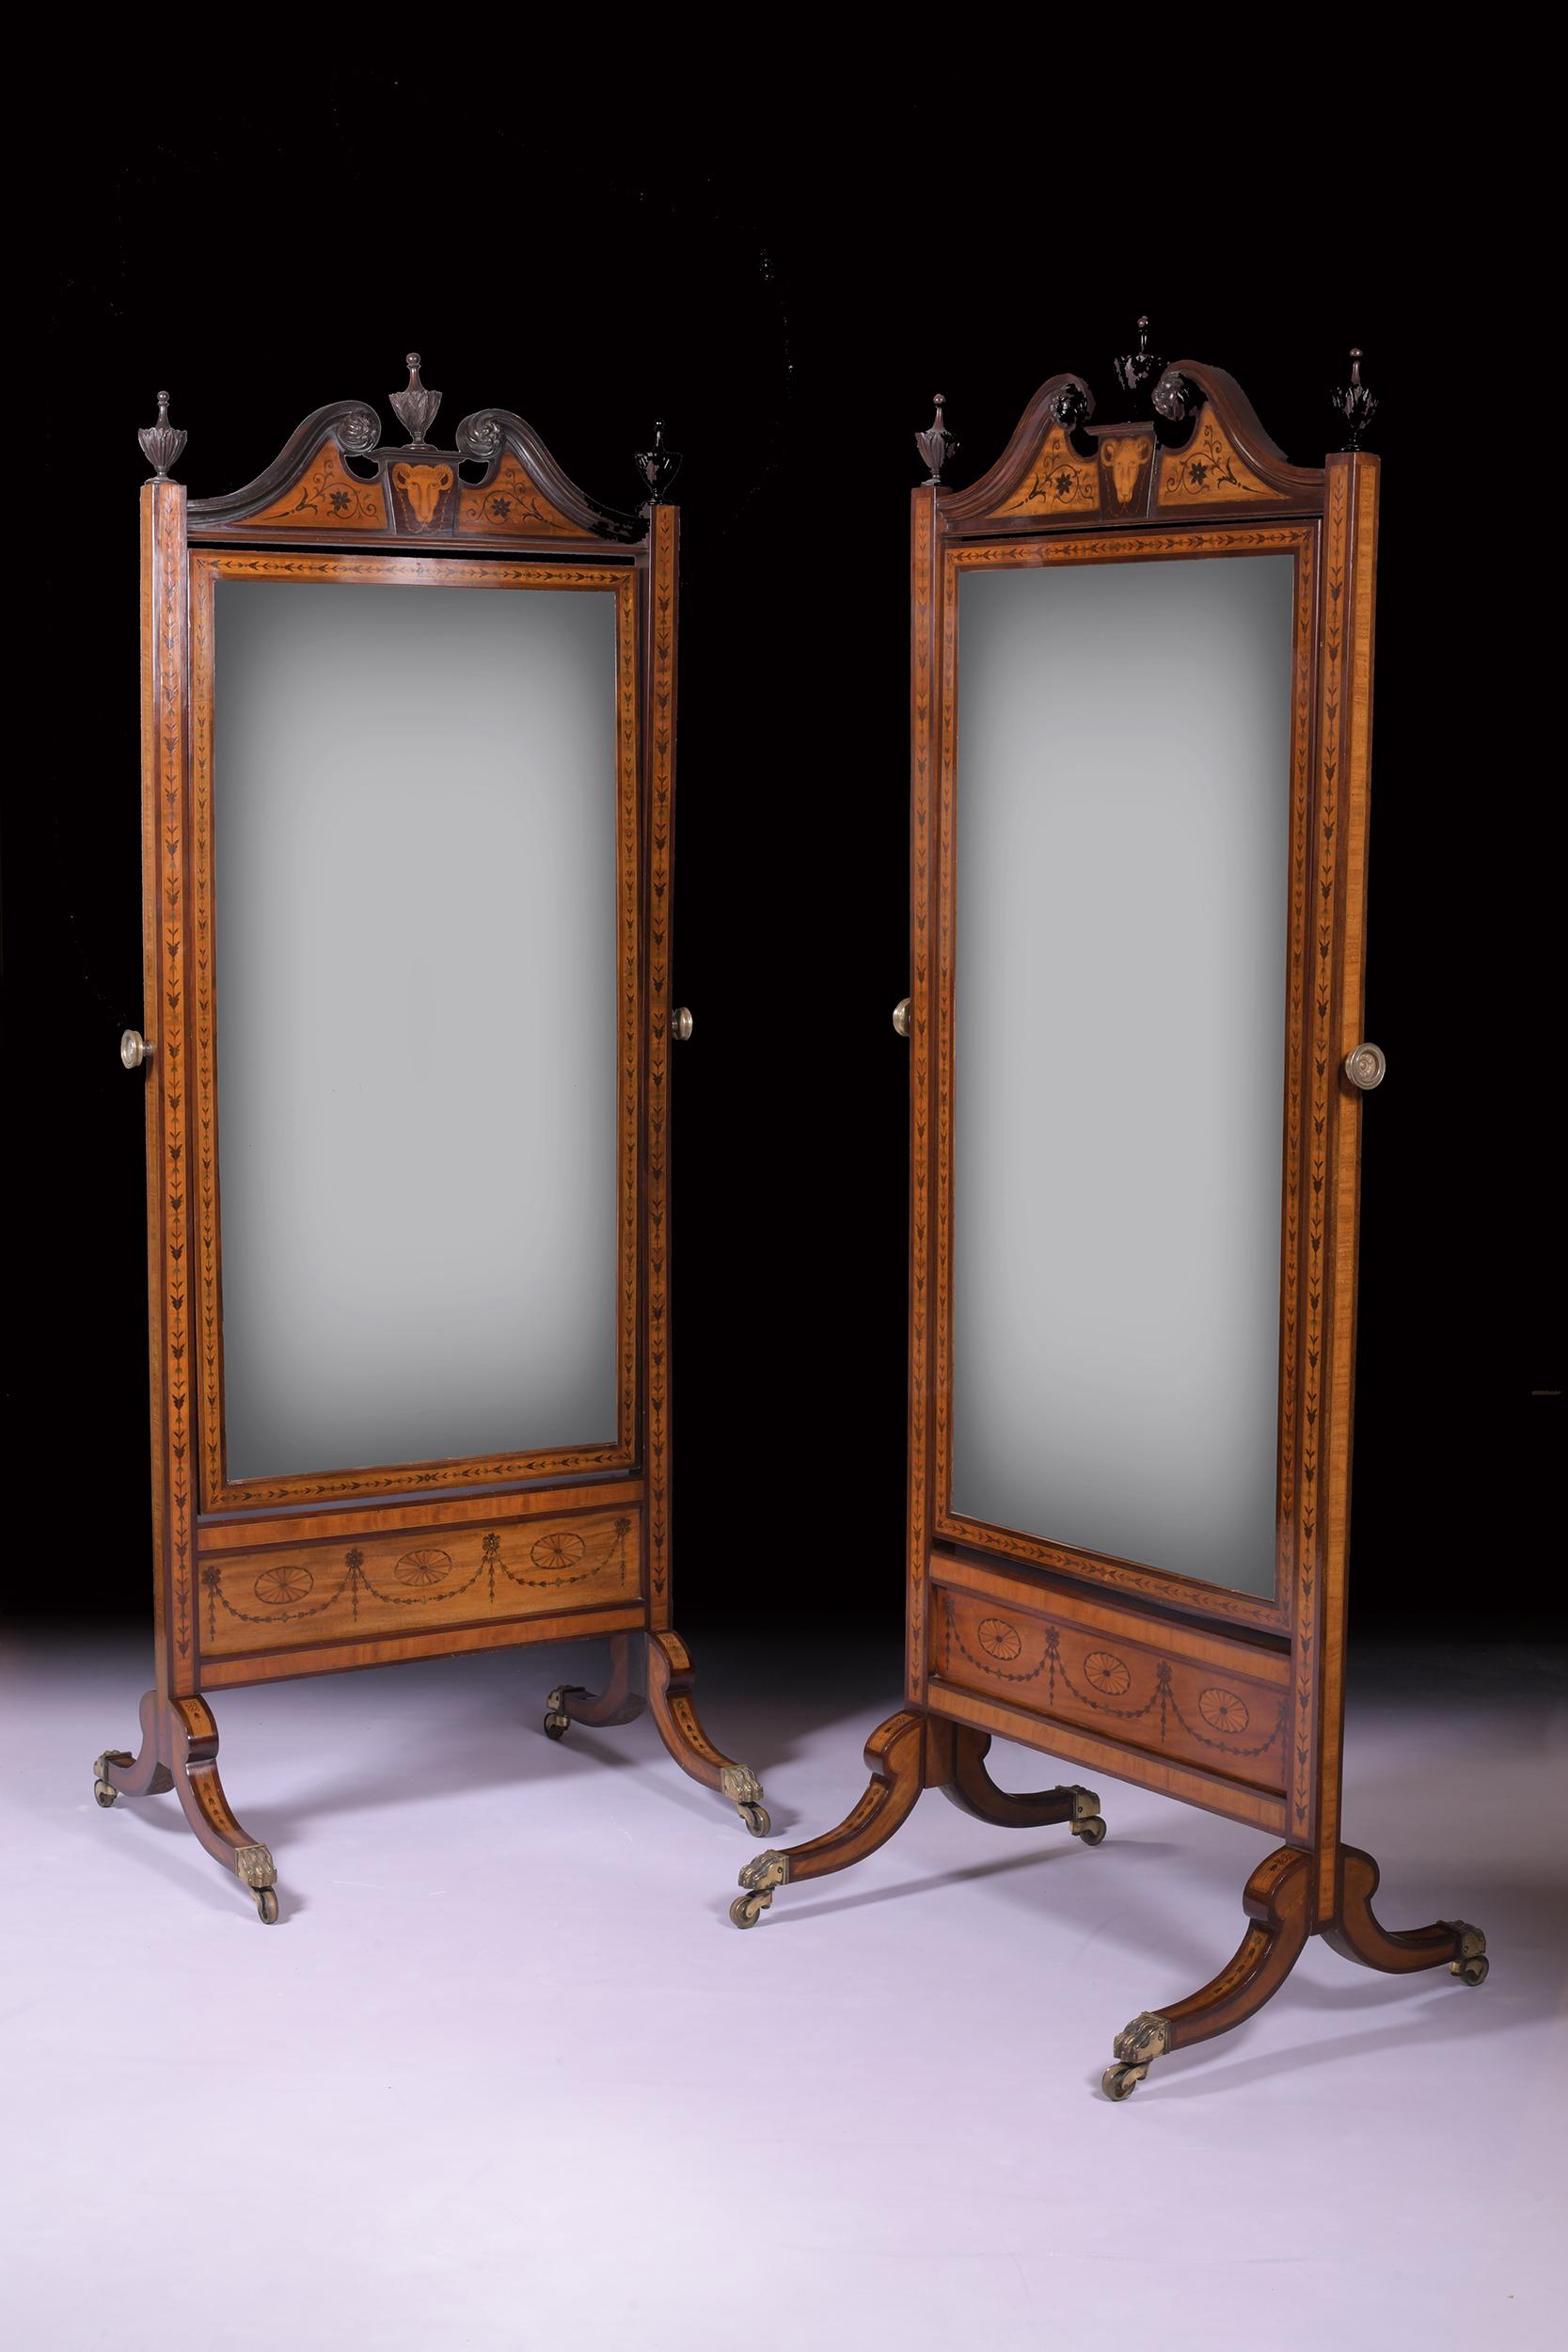 Exceptional pair of 19th century mahogany and inlaid cheval mirrors in the manner of William Moore (Dublin) in the Sheraton style, having broken swan inlaid pediment with central and side finials above original mirror plate in superb inlaid frame